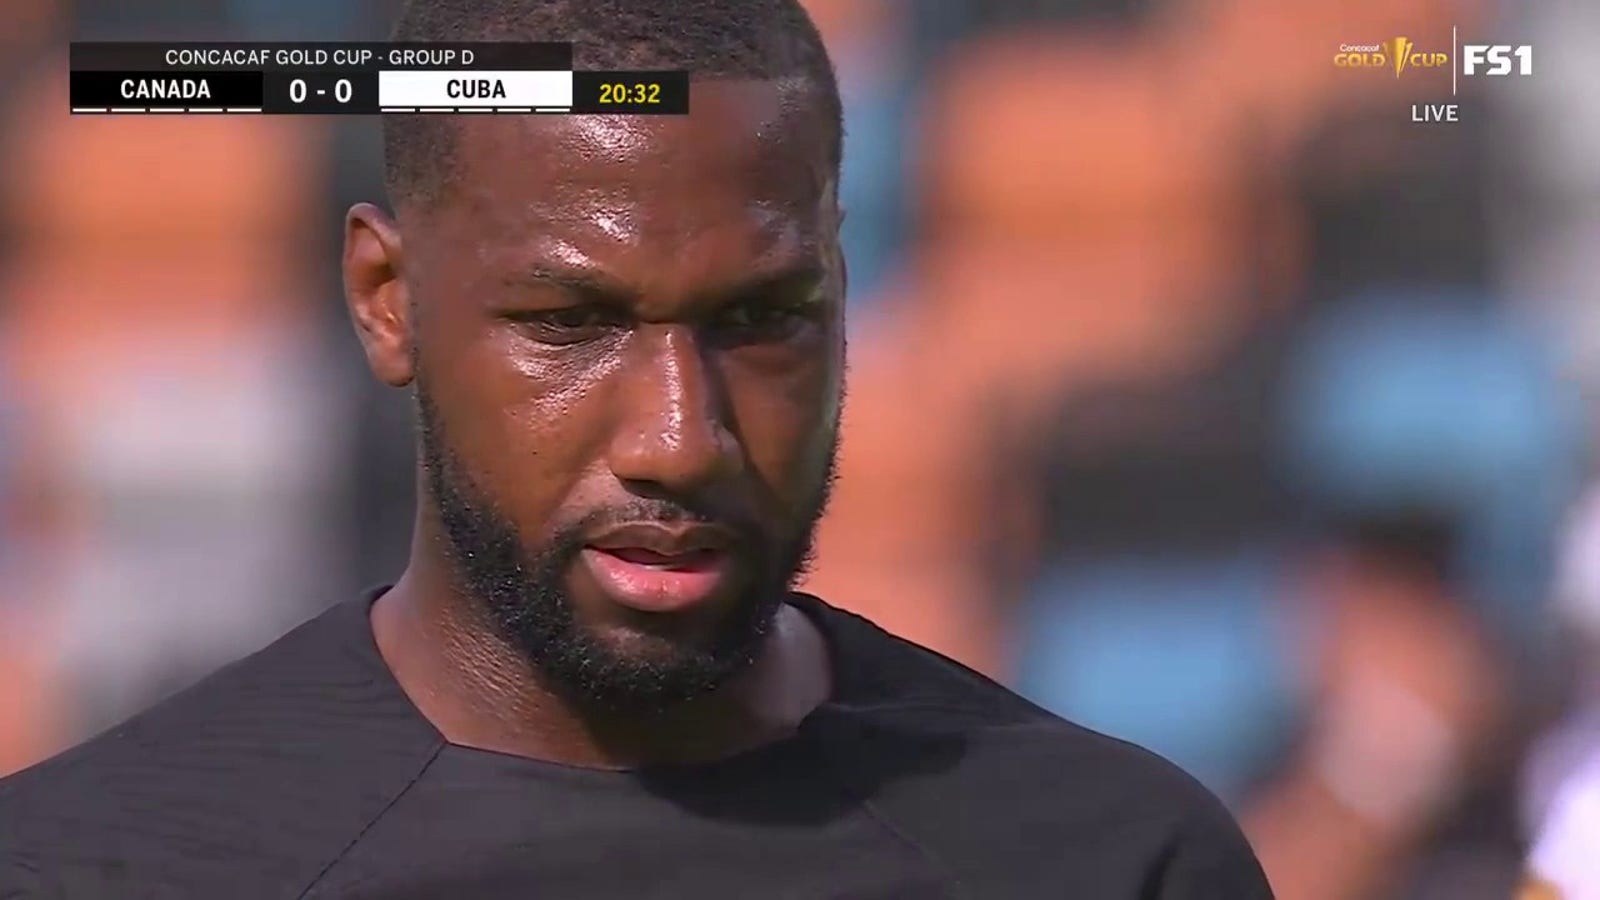 Junior Hoilett smashes in a penalty kick to give Canada a 1-0 lead over Cuba